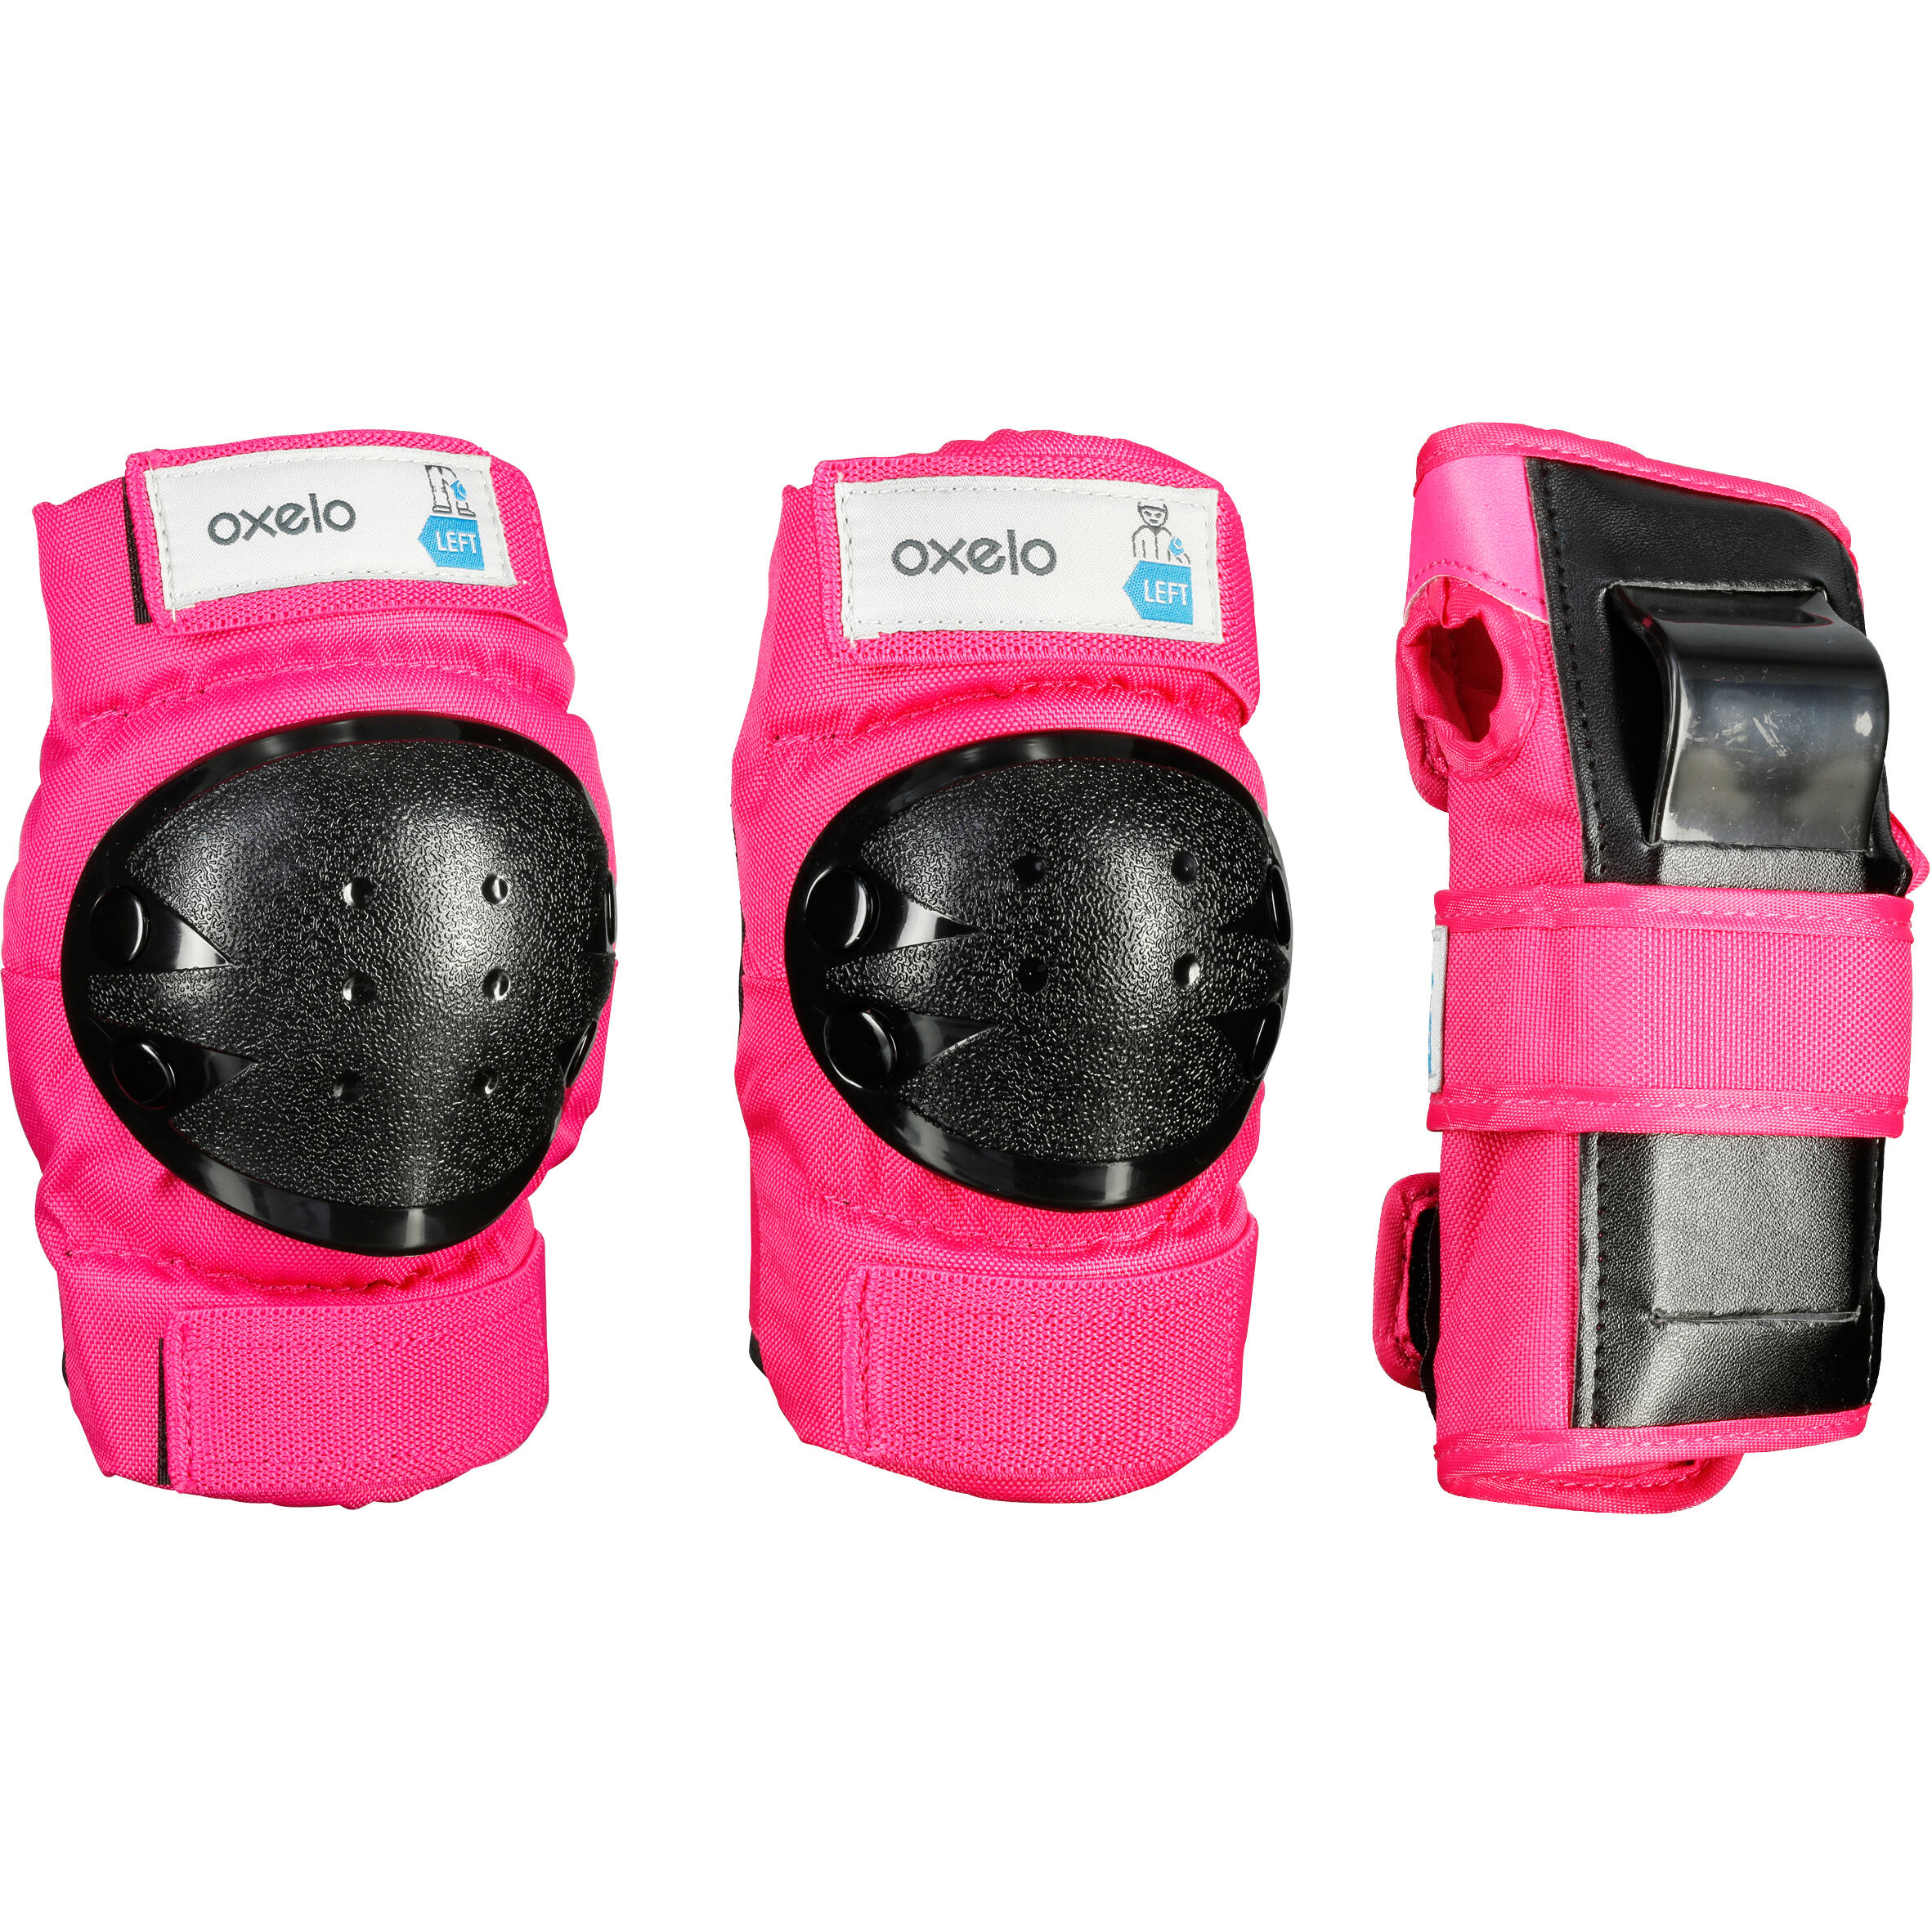 Kids' 2 x 3-Piece Skating Skateboard Scooter Protective Gear Basic - Pink 1/7